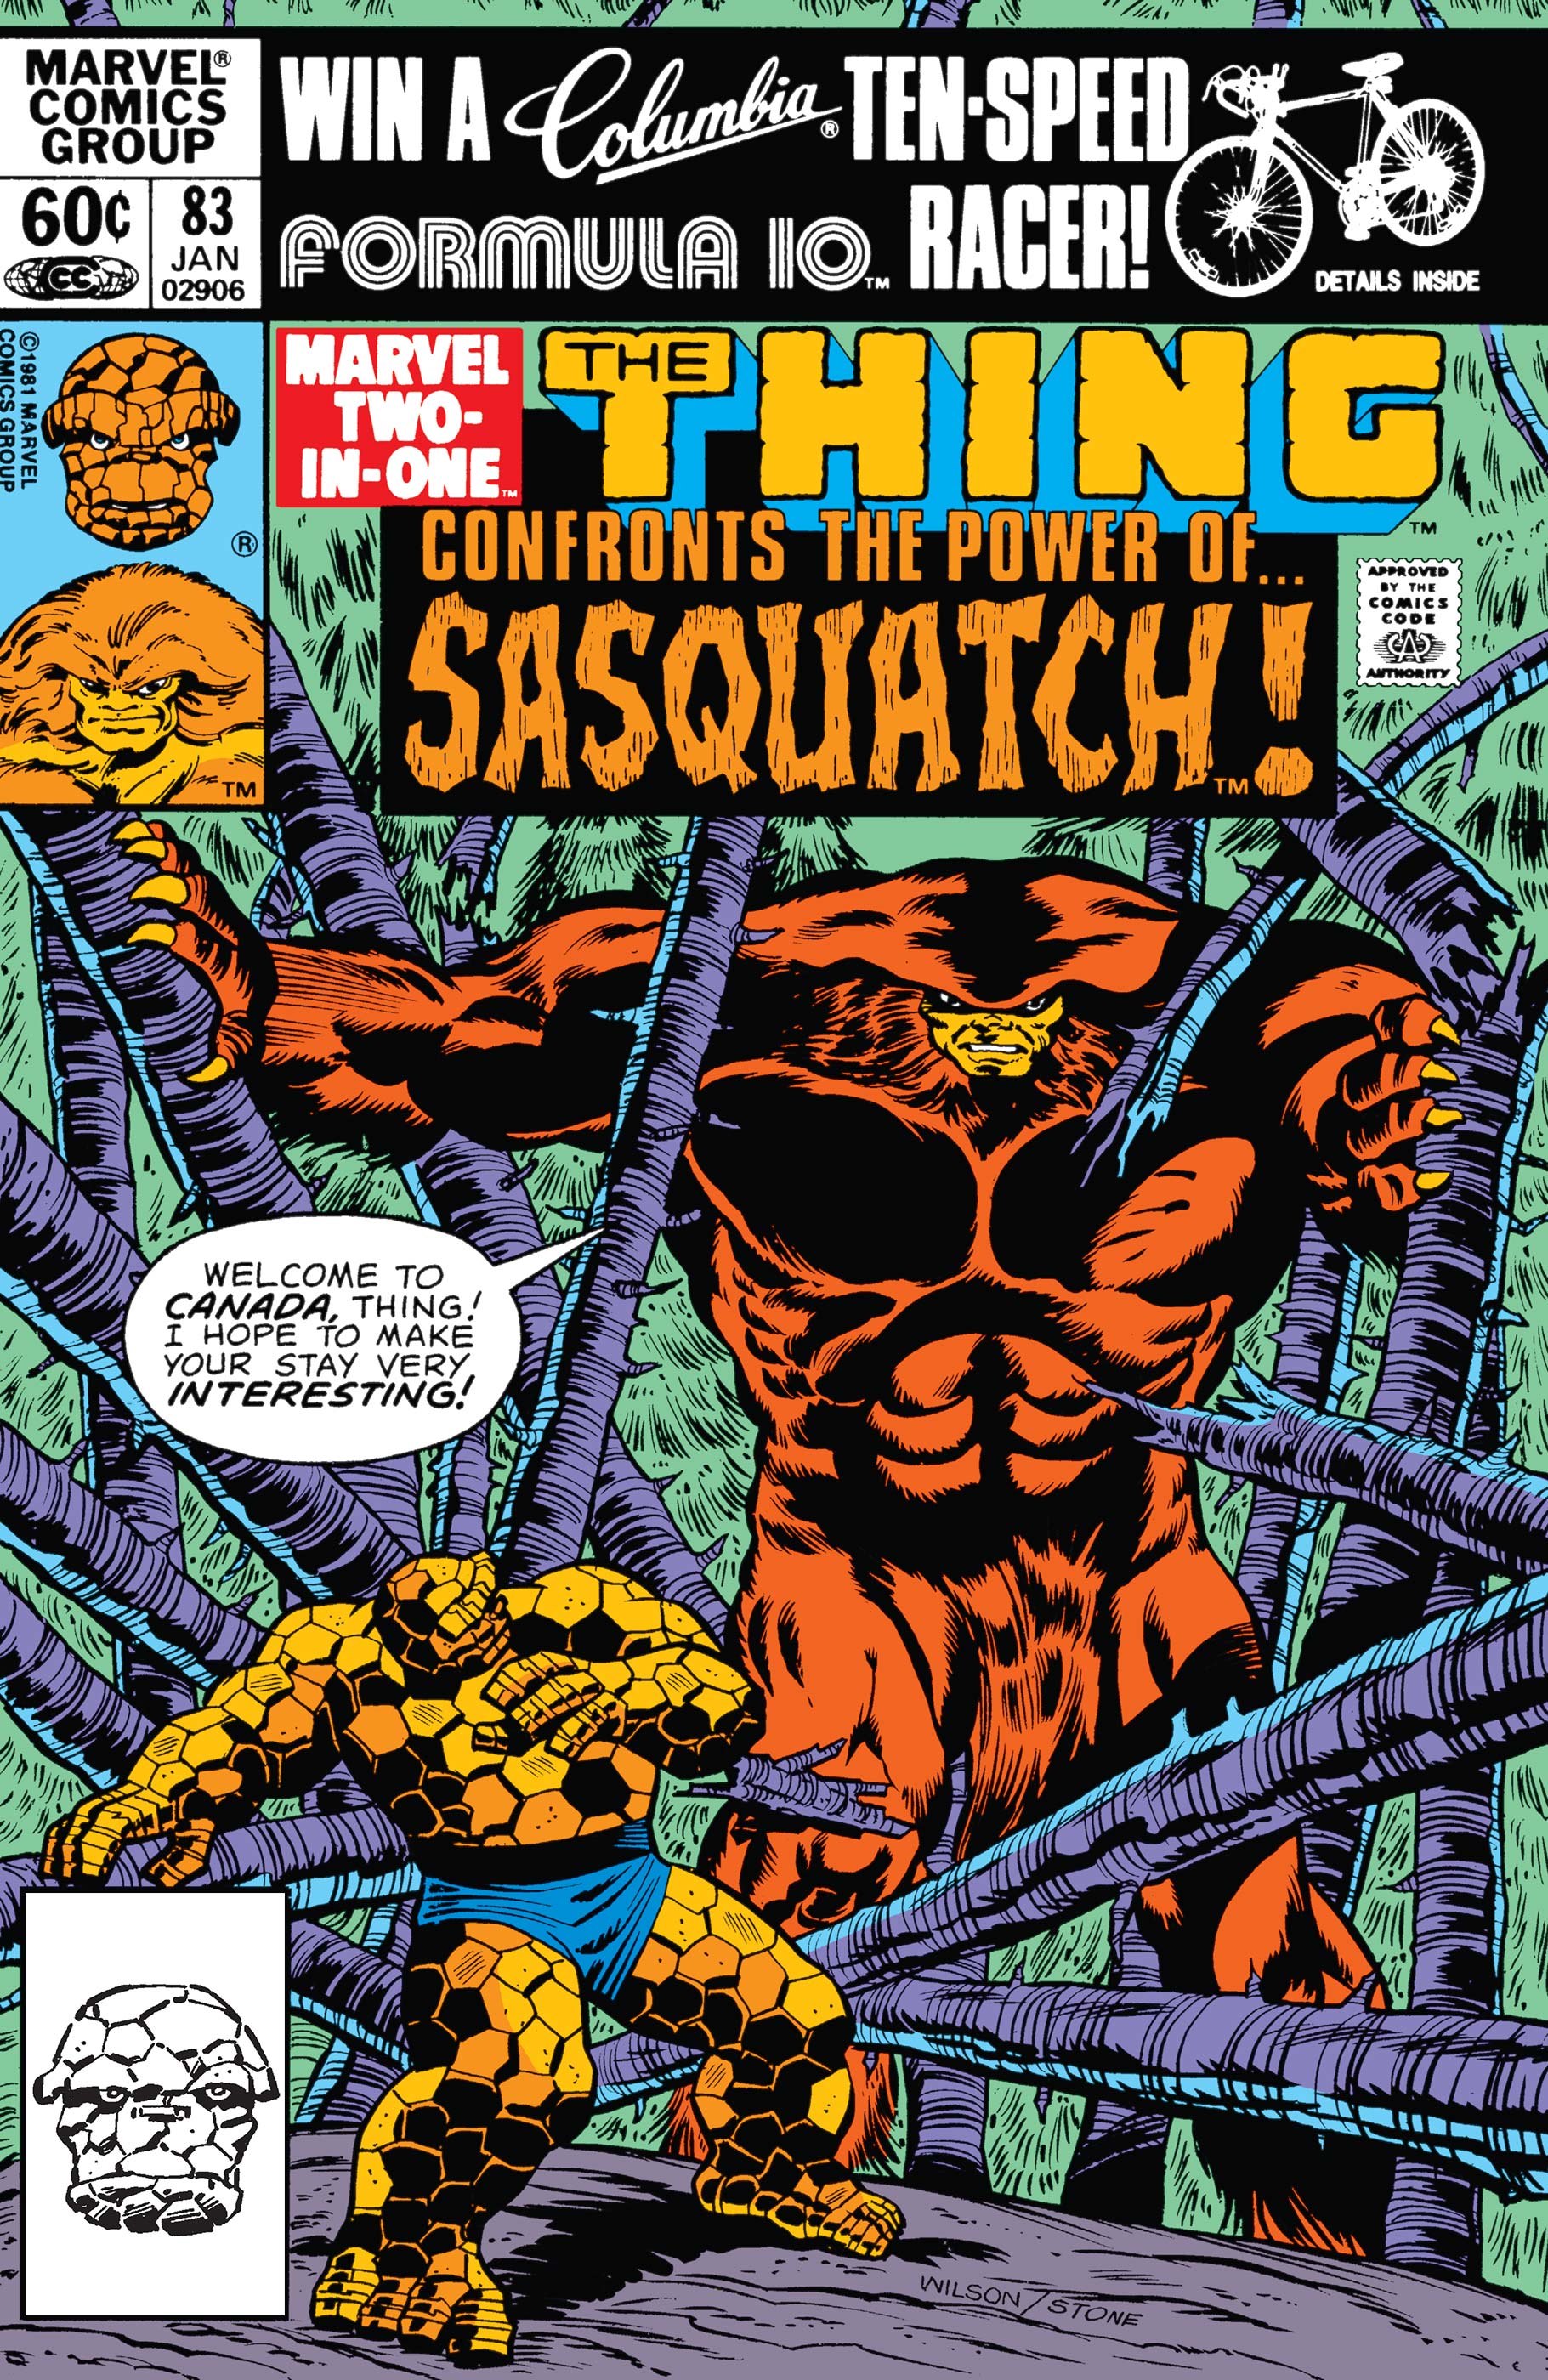 Marvel Two-in-One (1974) #83